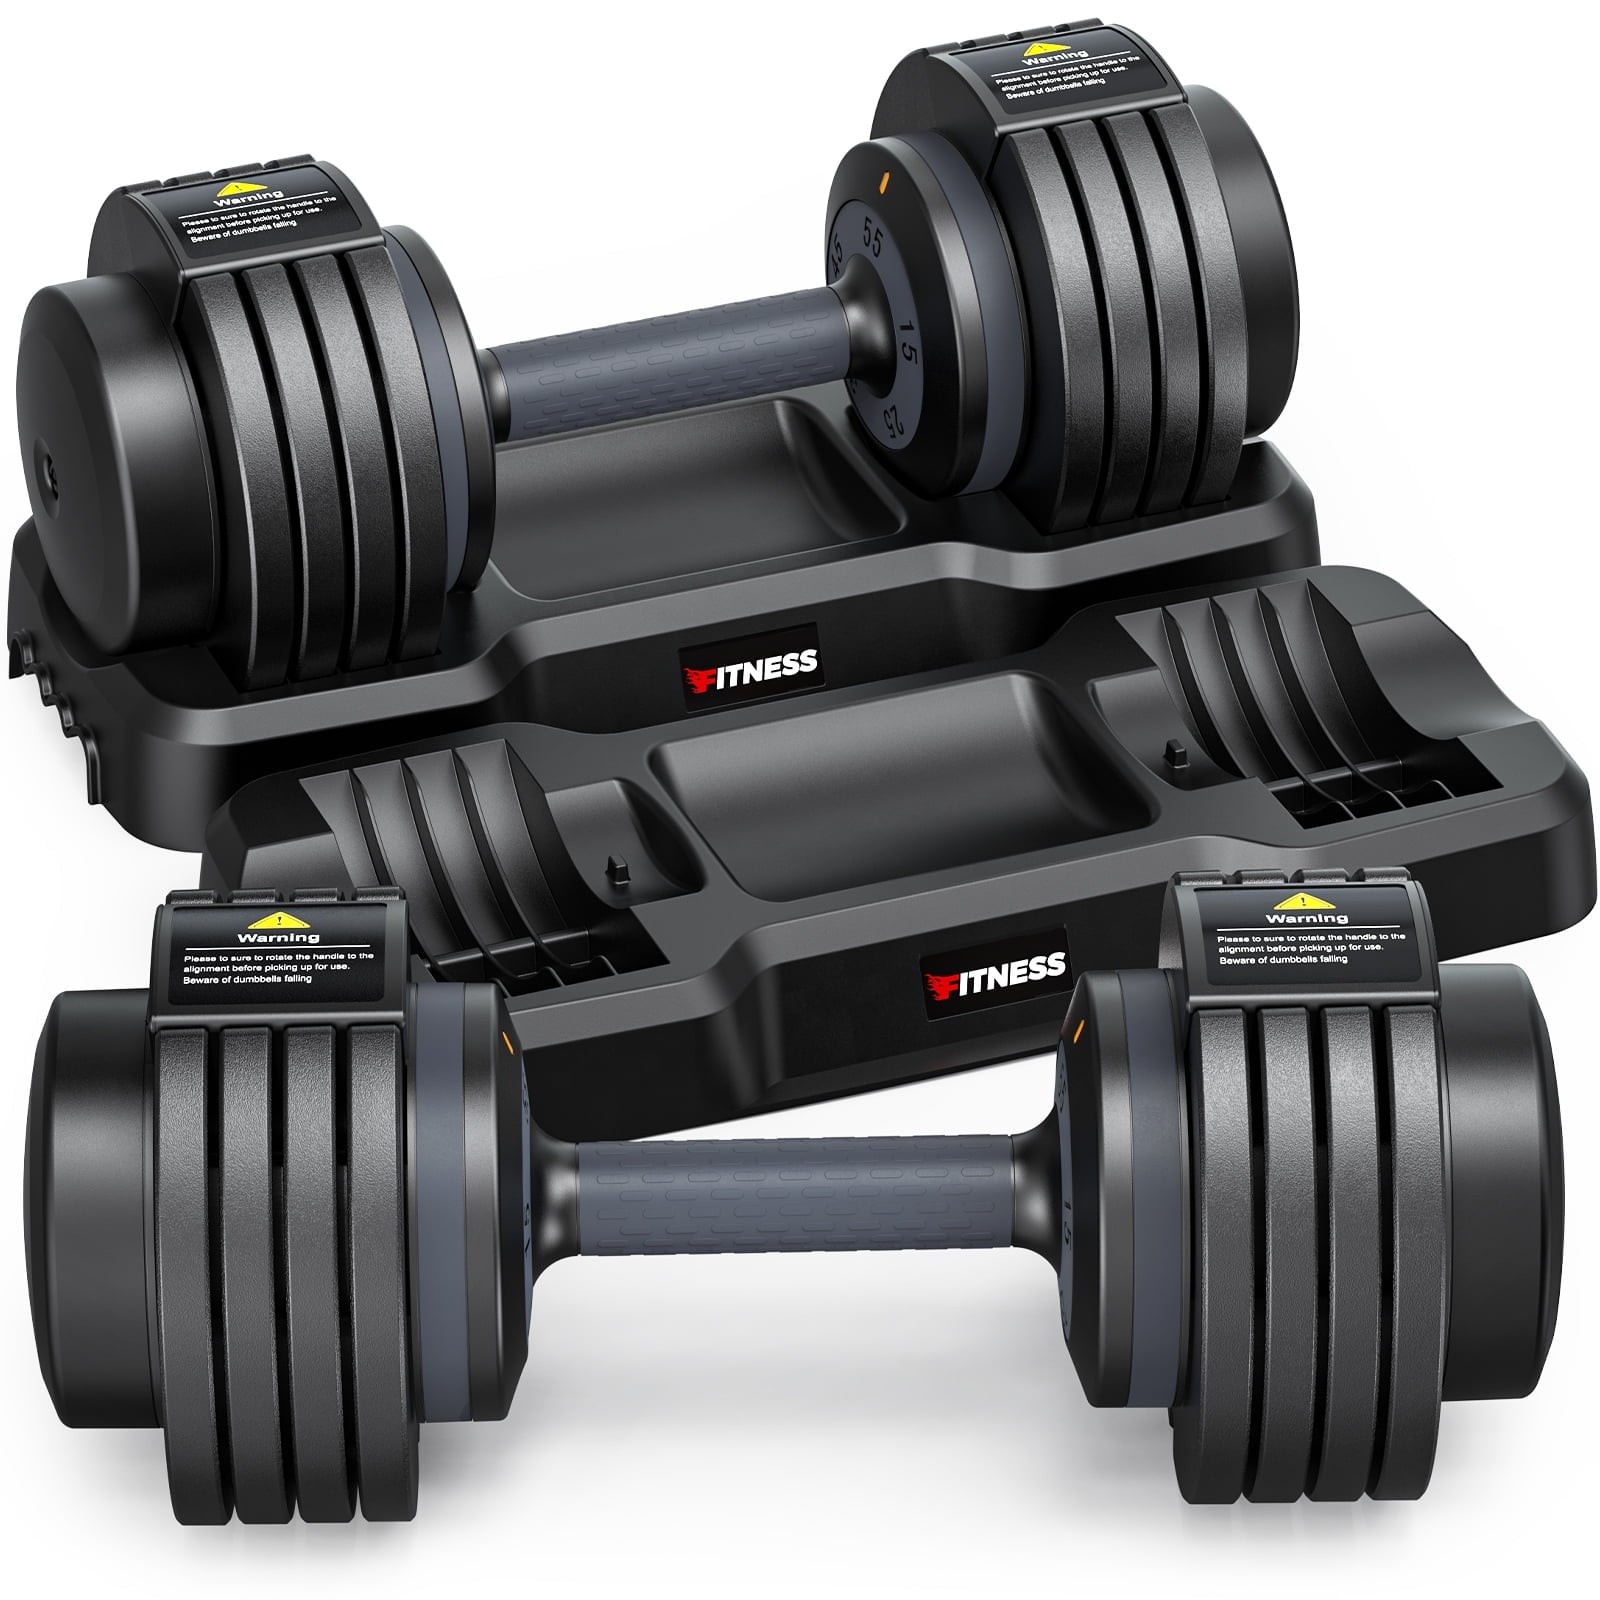 Gikpal 55lb 5 in 1 Adjustable Dumbbell Free Weights Plates and Rack - Hand Weights for Women and Men - Adjust Weight for Home Gym Full Body Workout